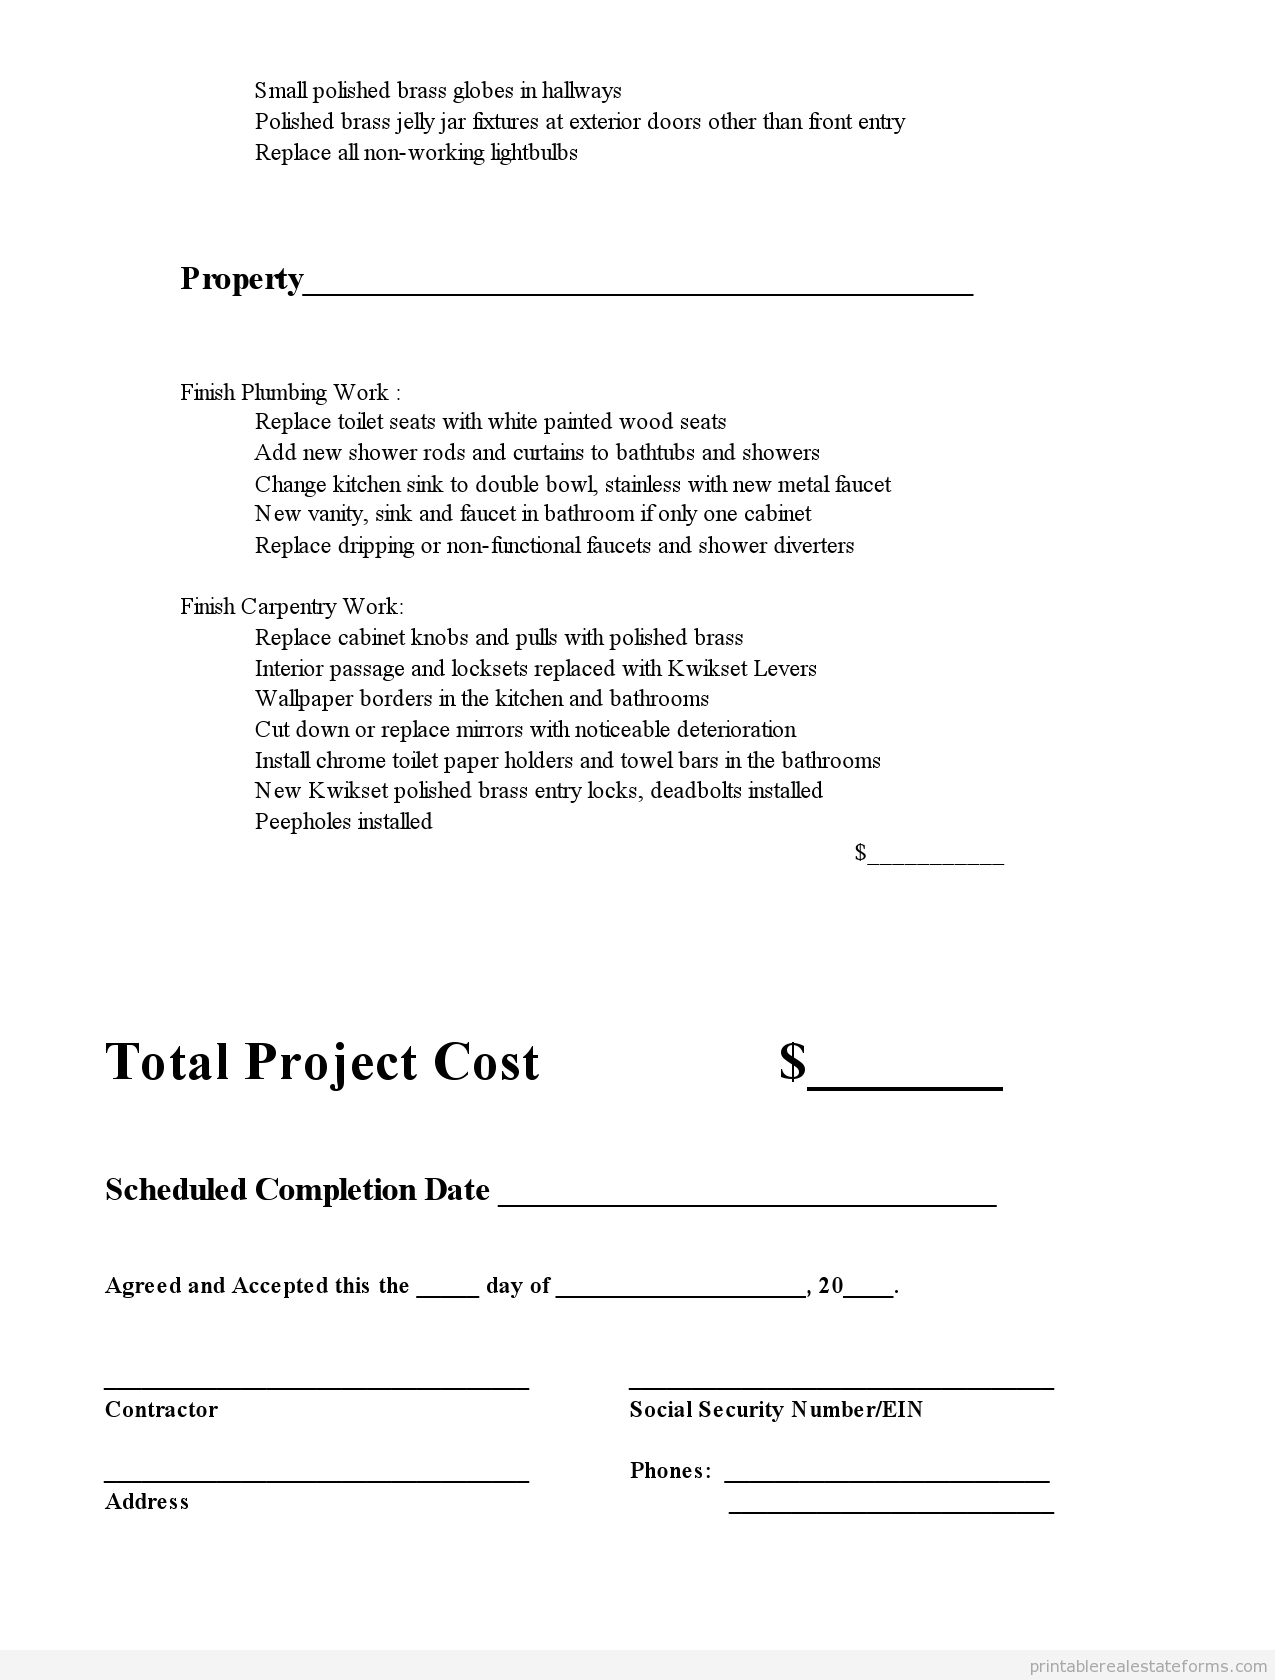 Printable Subcontractor Agreement Template 2015 | Sample Forms 2015 - Free Printable Subcontractor Agreement